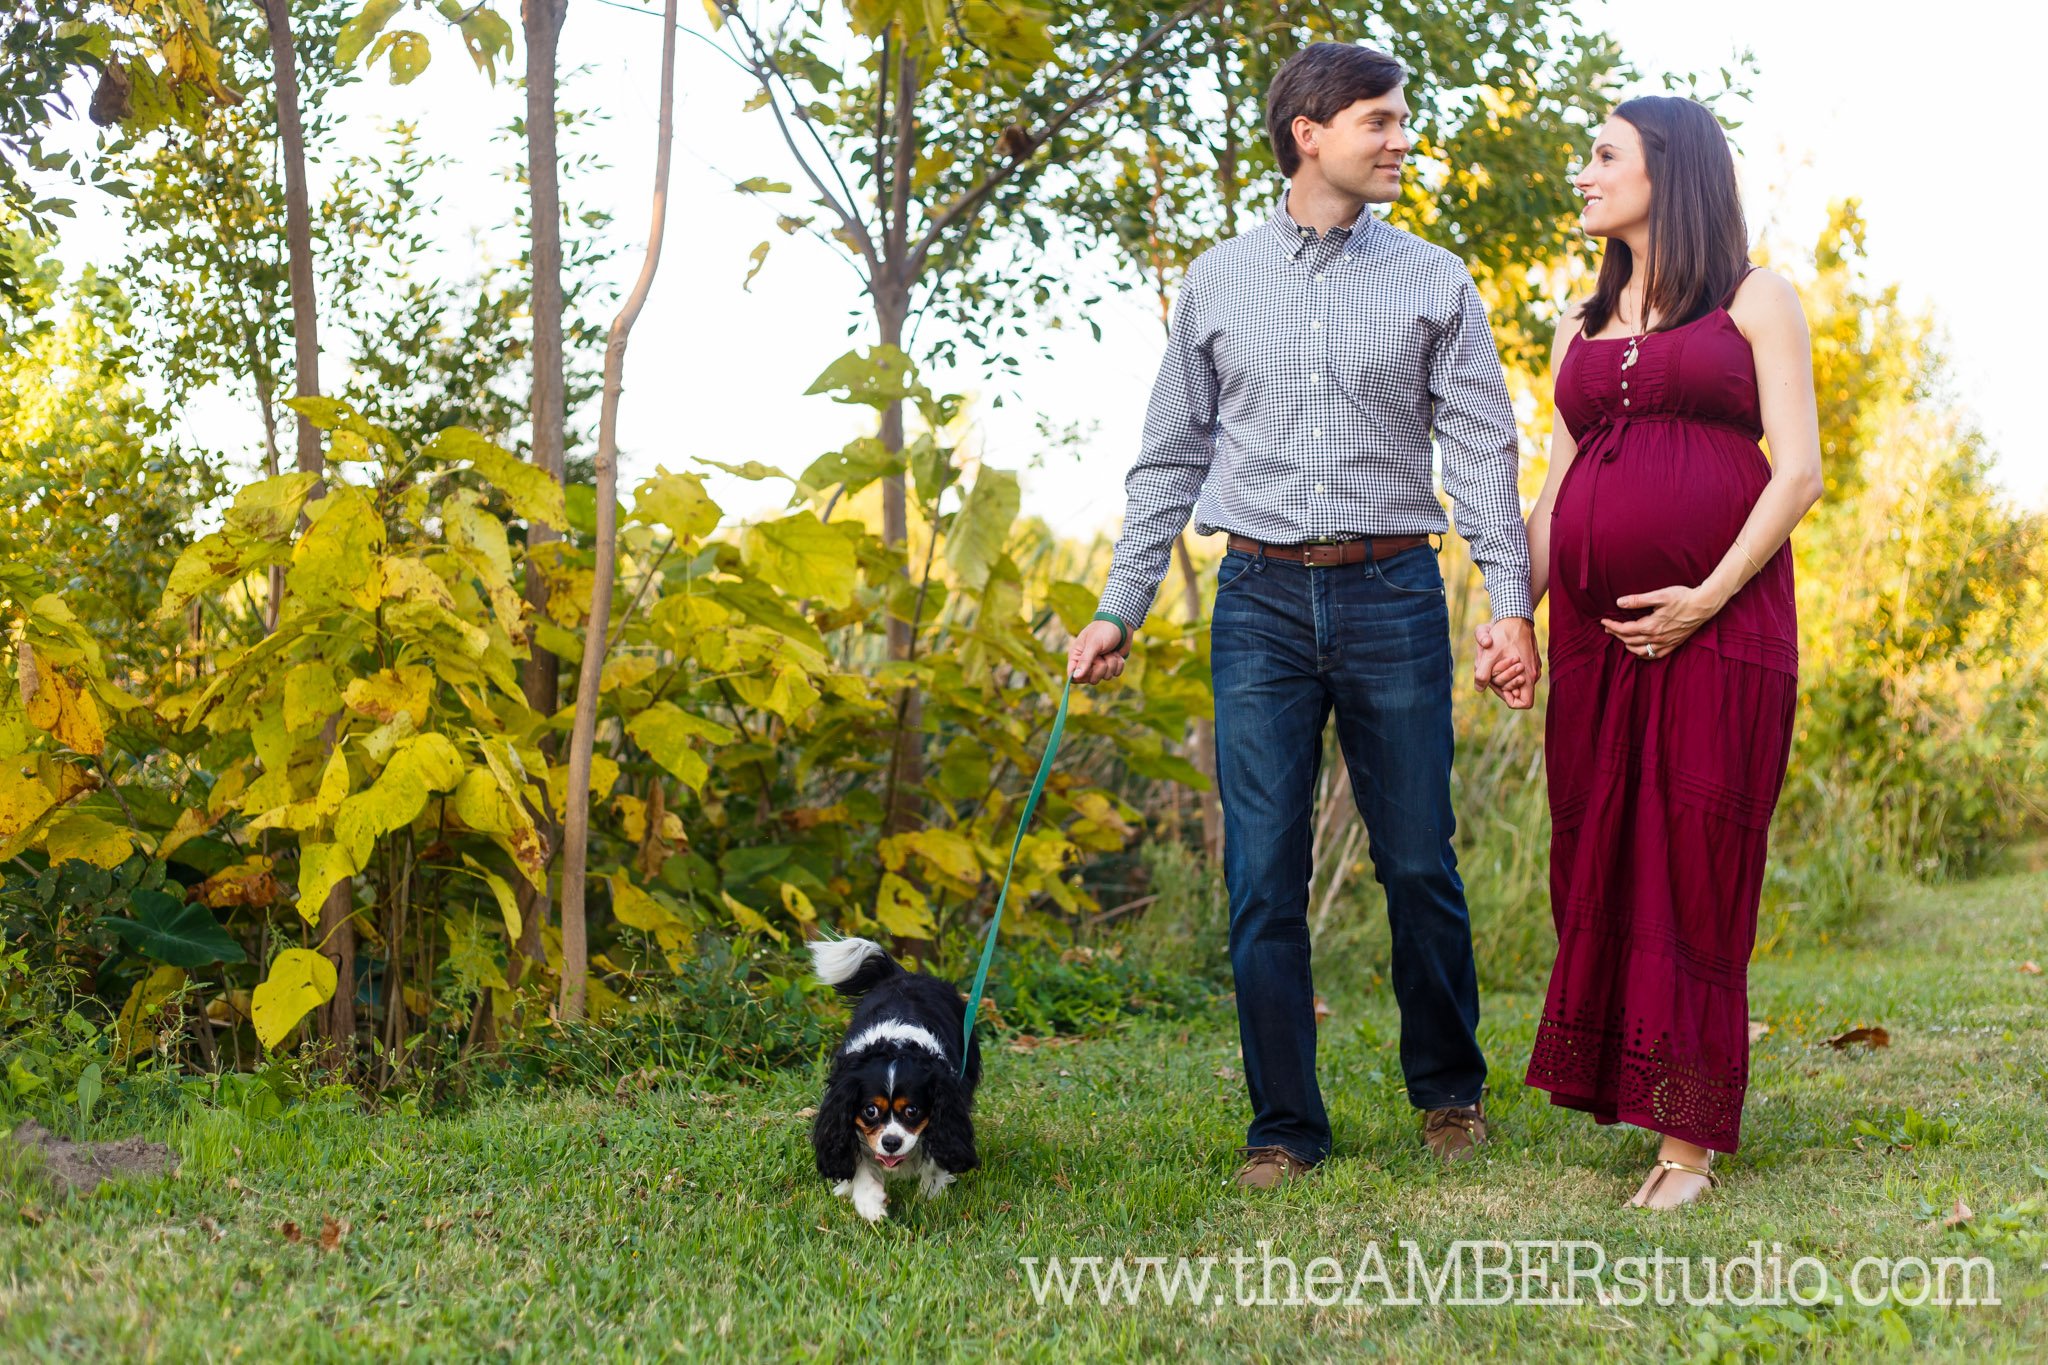 dallas-photographer-maternity-pregnant-preggers-baby-couple-married-white-rock-lake-dfw-texas-black-african-american-fall-burgundydress-jeans0010